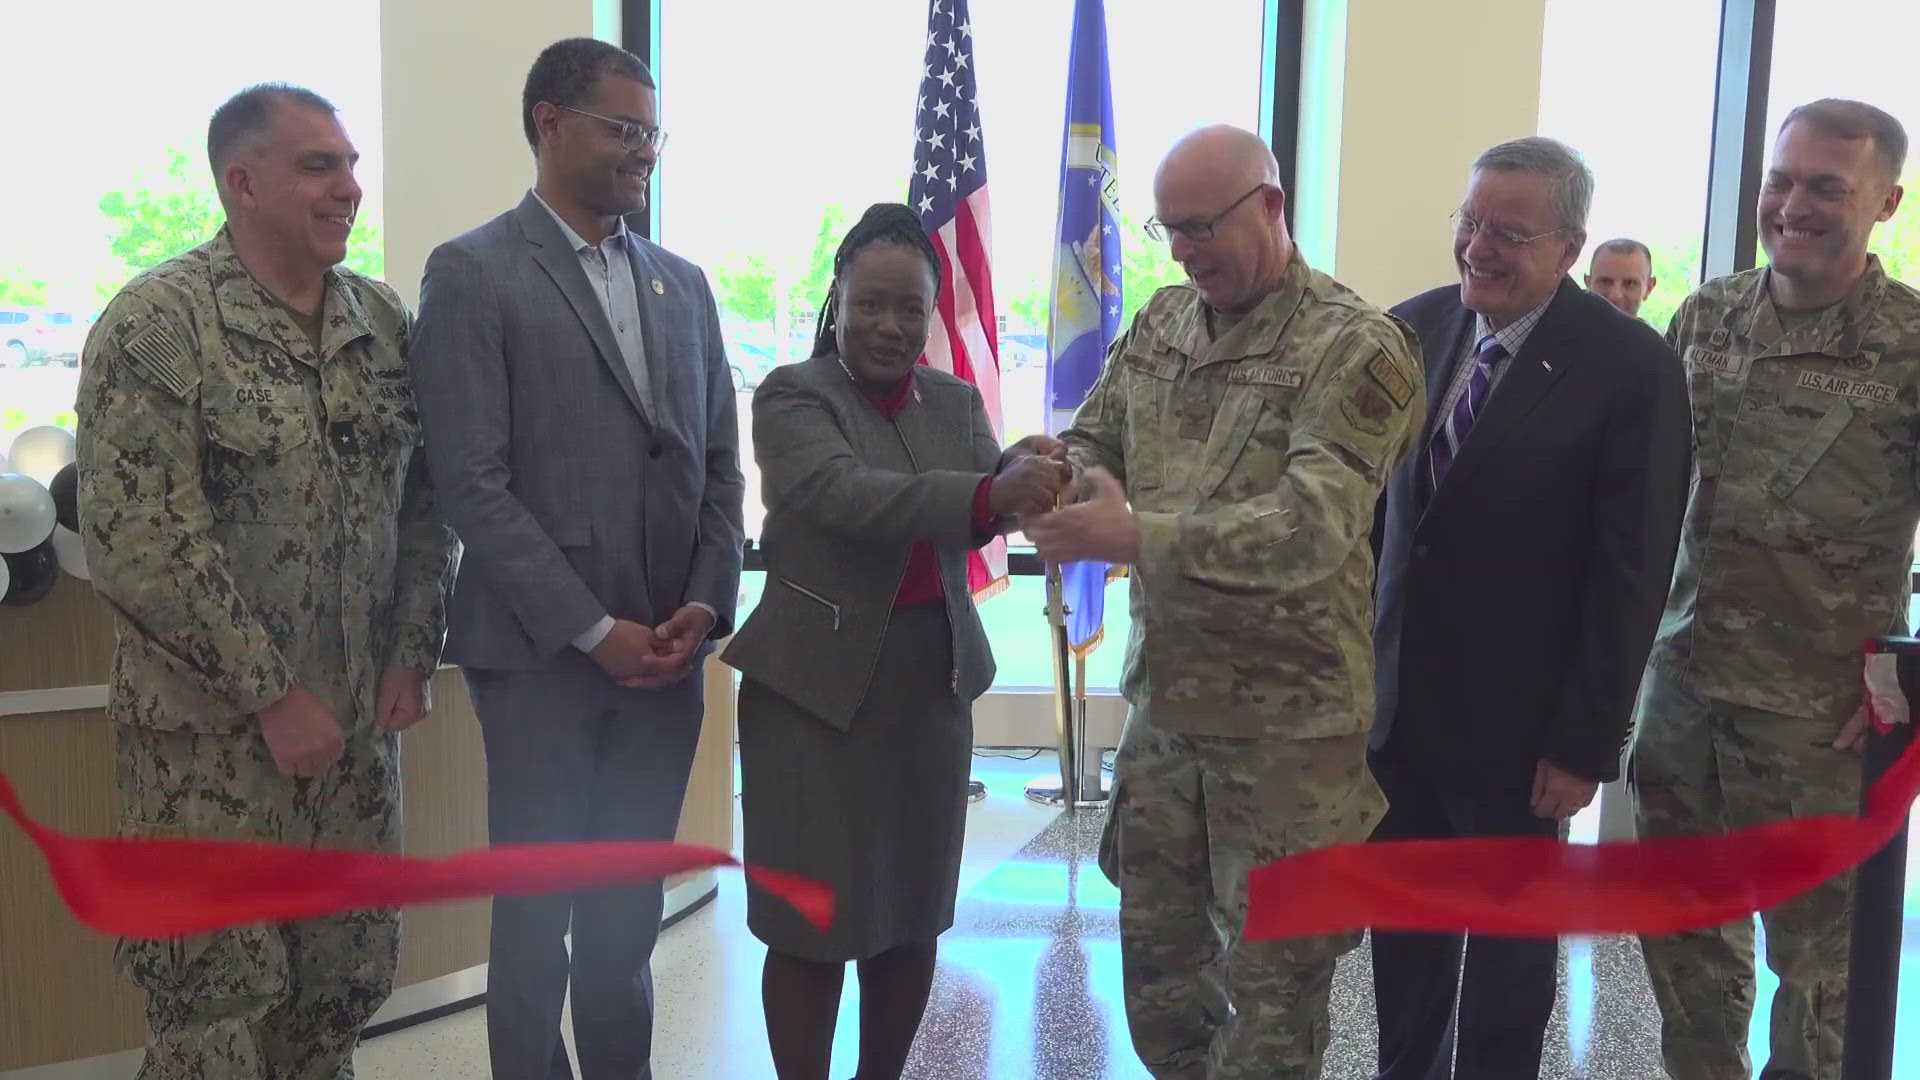 Veterans now have a new place to turn for medical care. Joint Base Langley Eustis is now home to a new Veterans Affairs clinic only meant for vets.